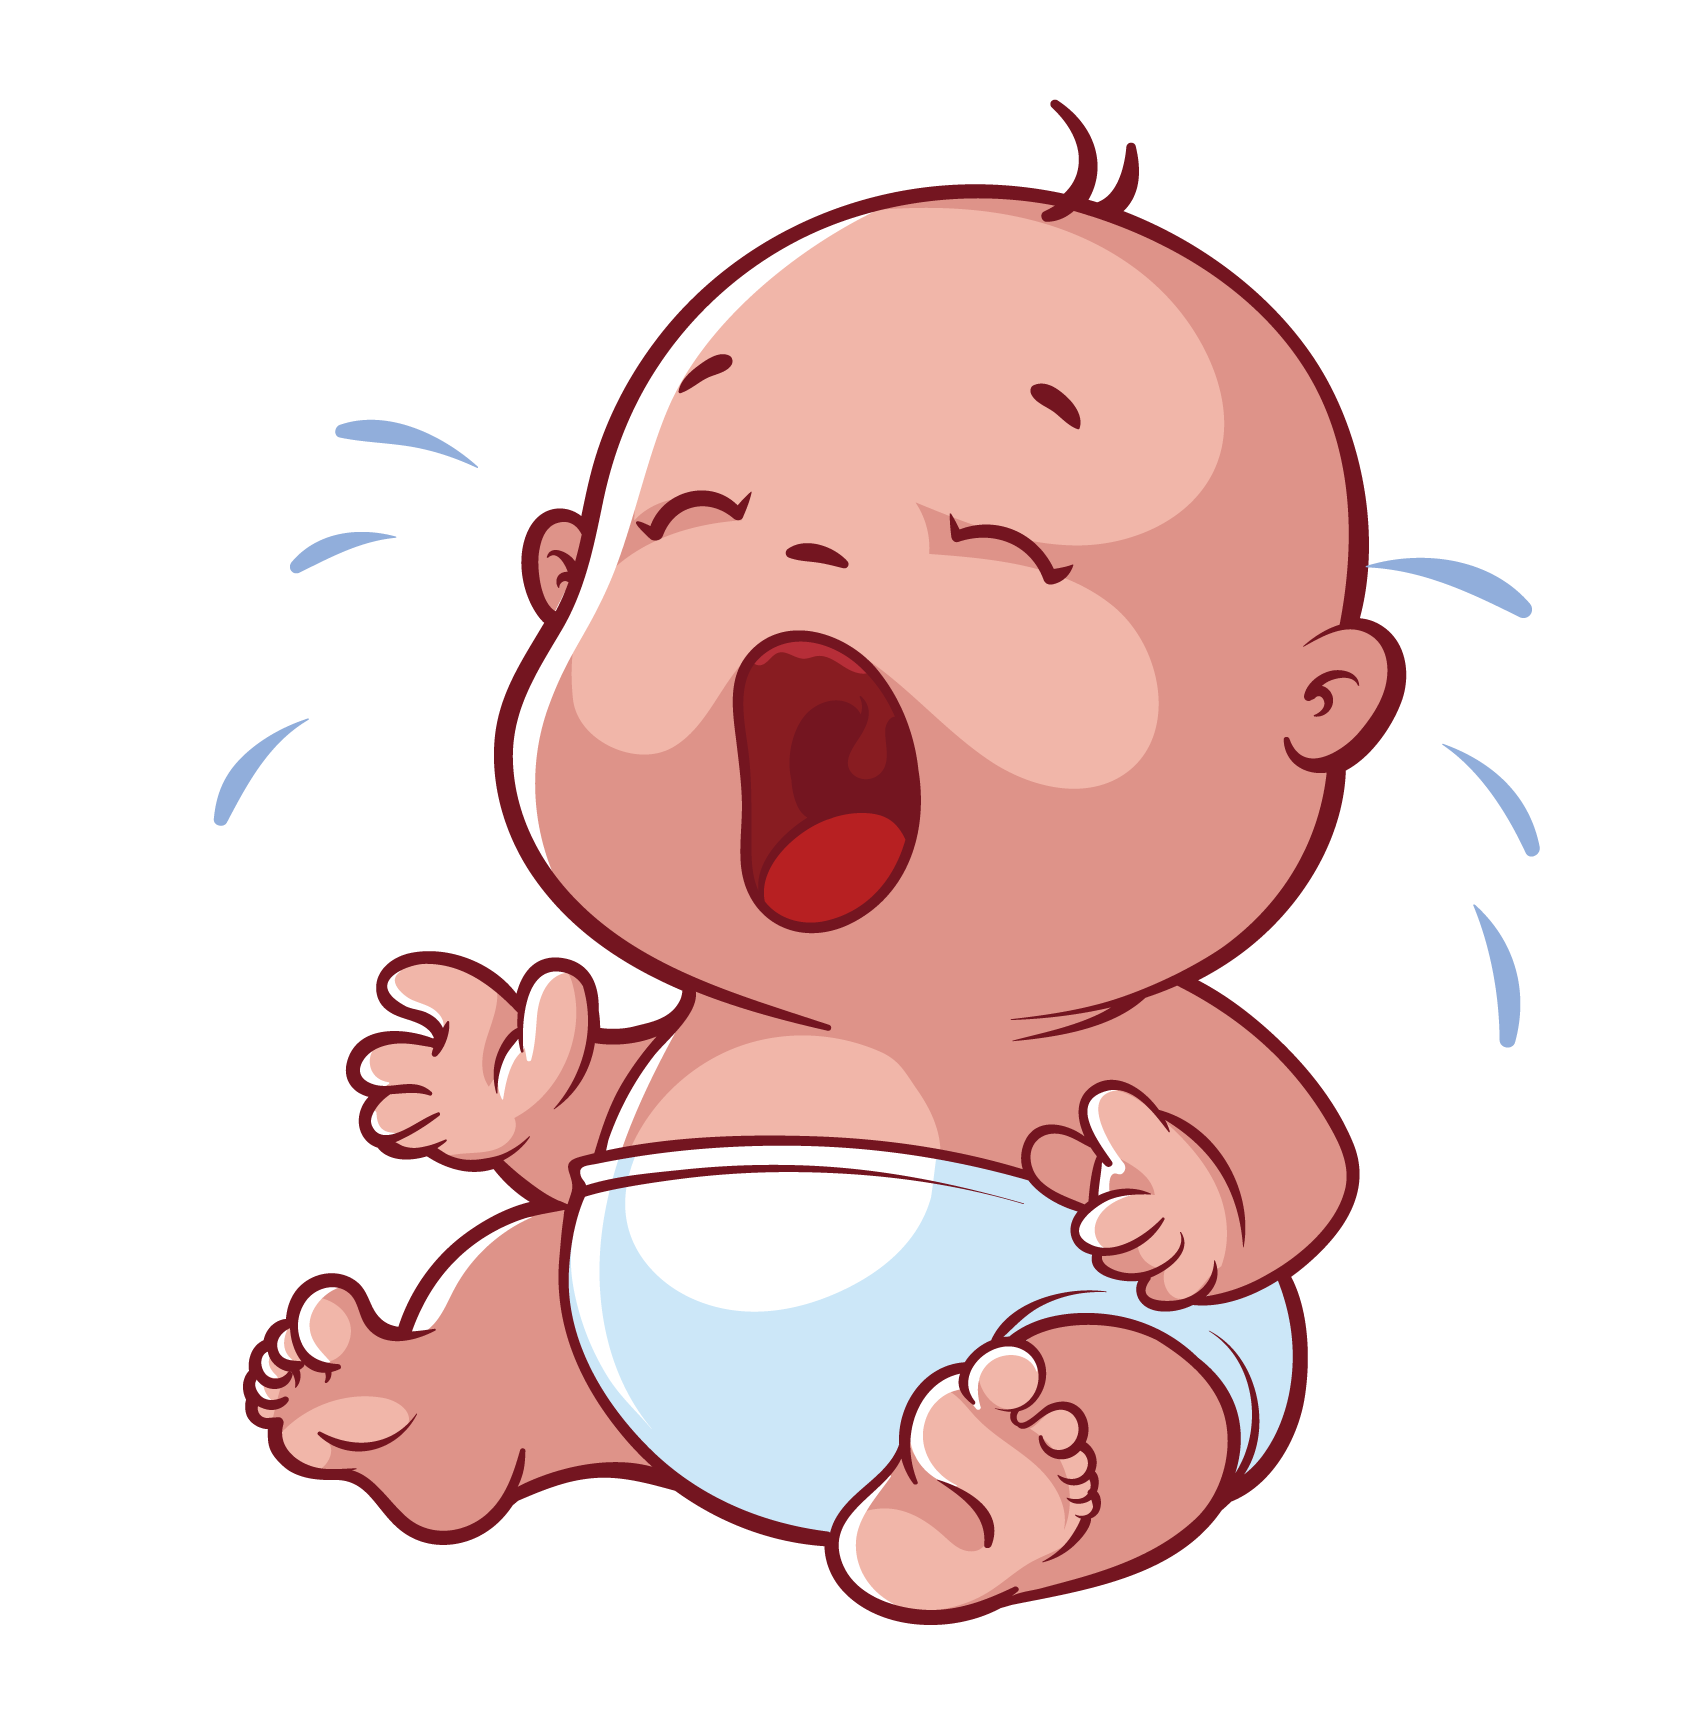 Infant Cartoon Crying - Crying baby png download - 1696*1724 - Free